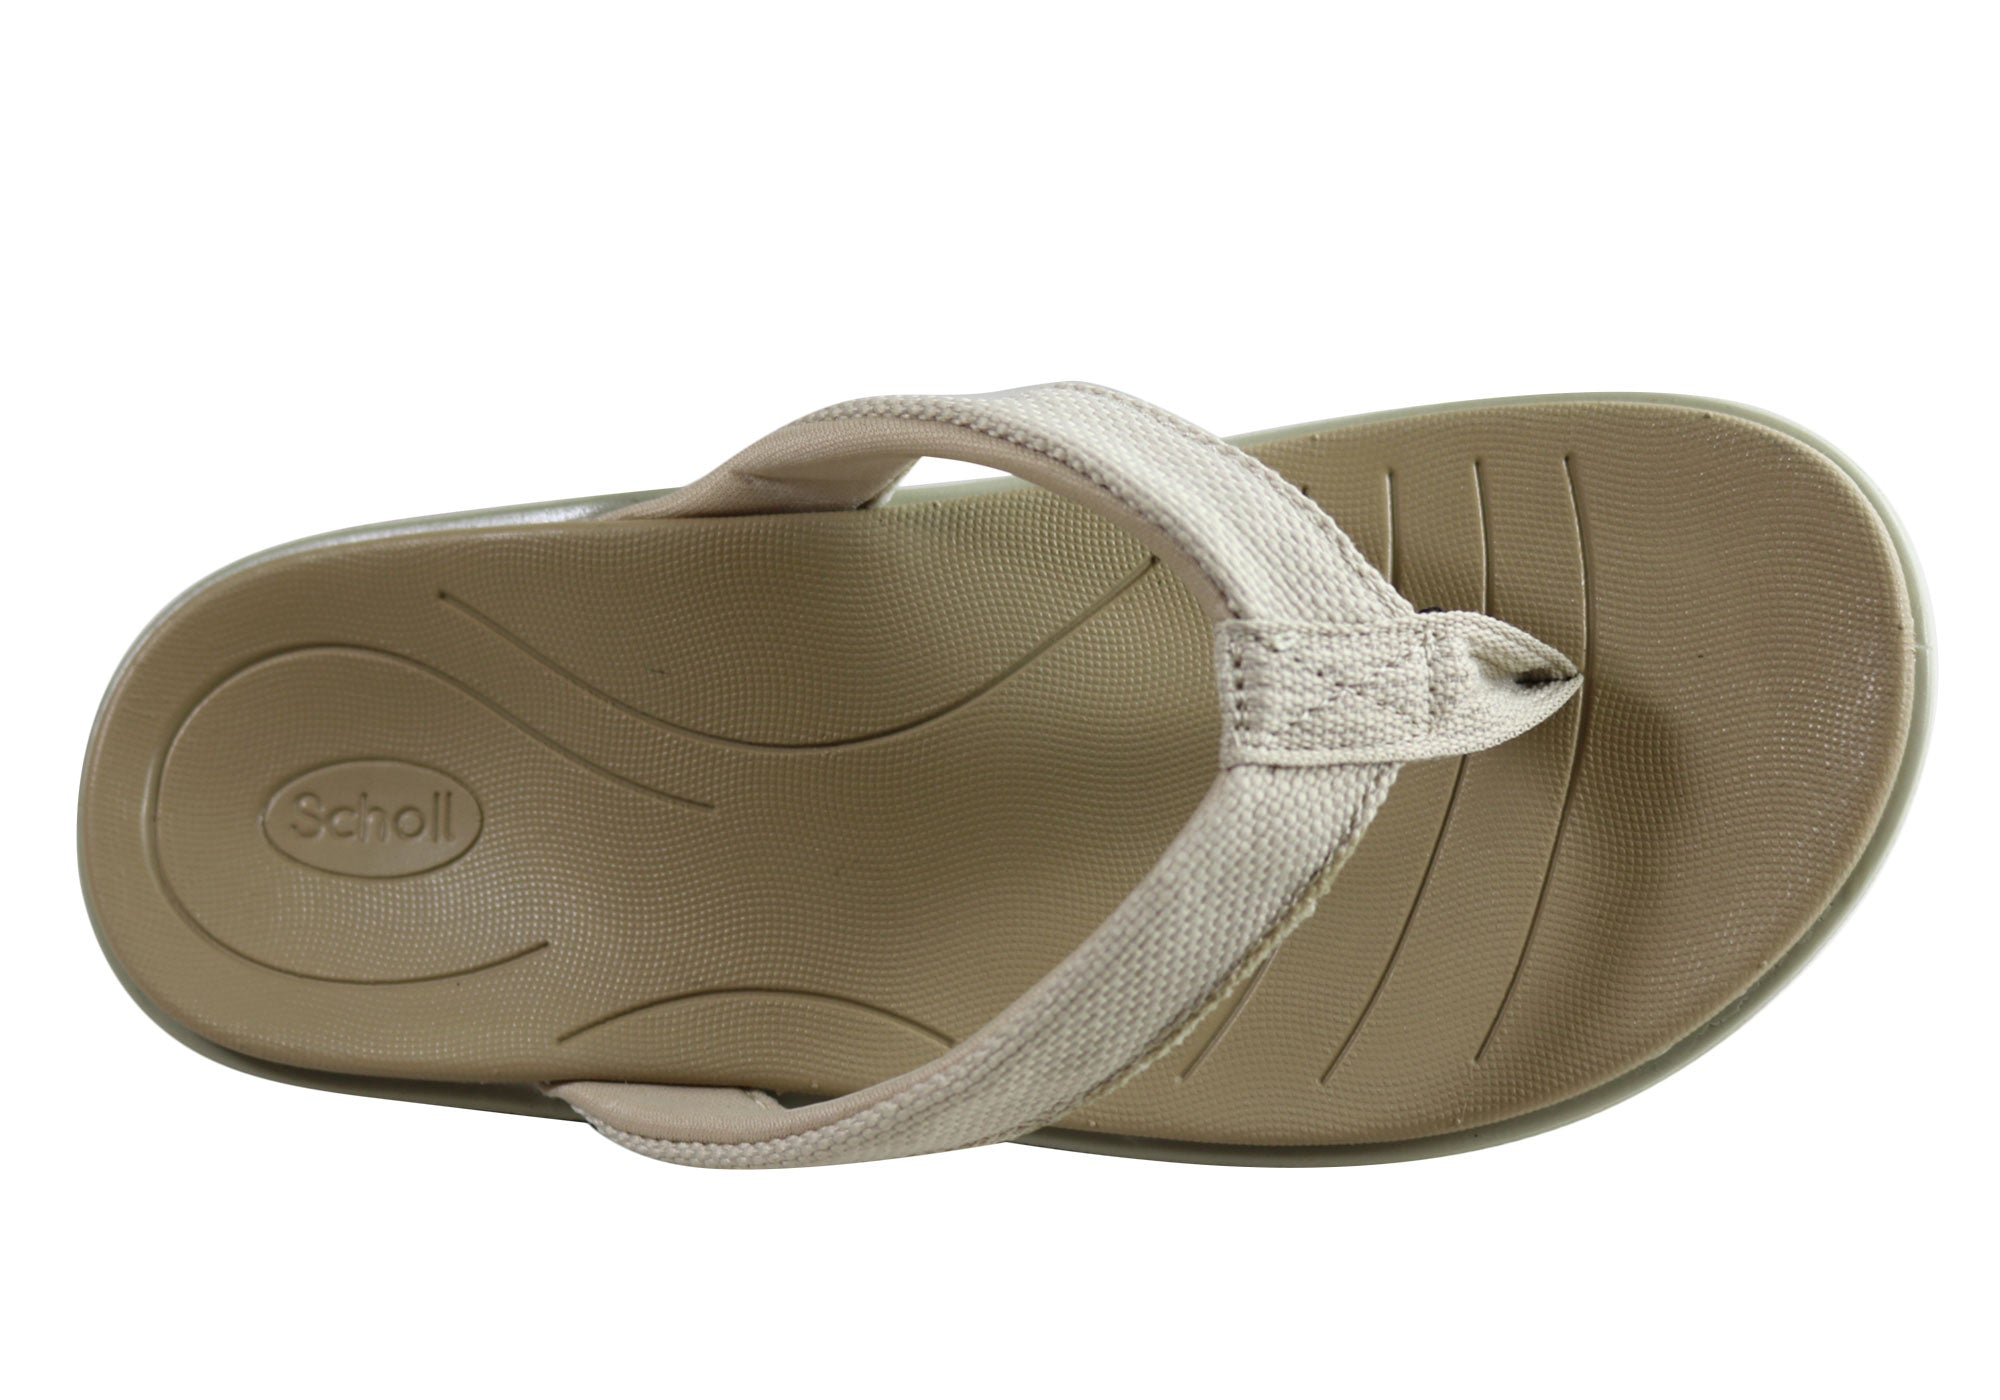 Scholl Orthaheel Pacific Womens Comfortable Supportive Thongs Sandals